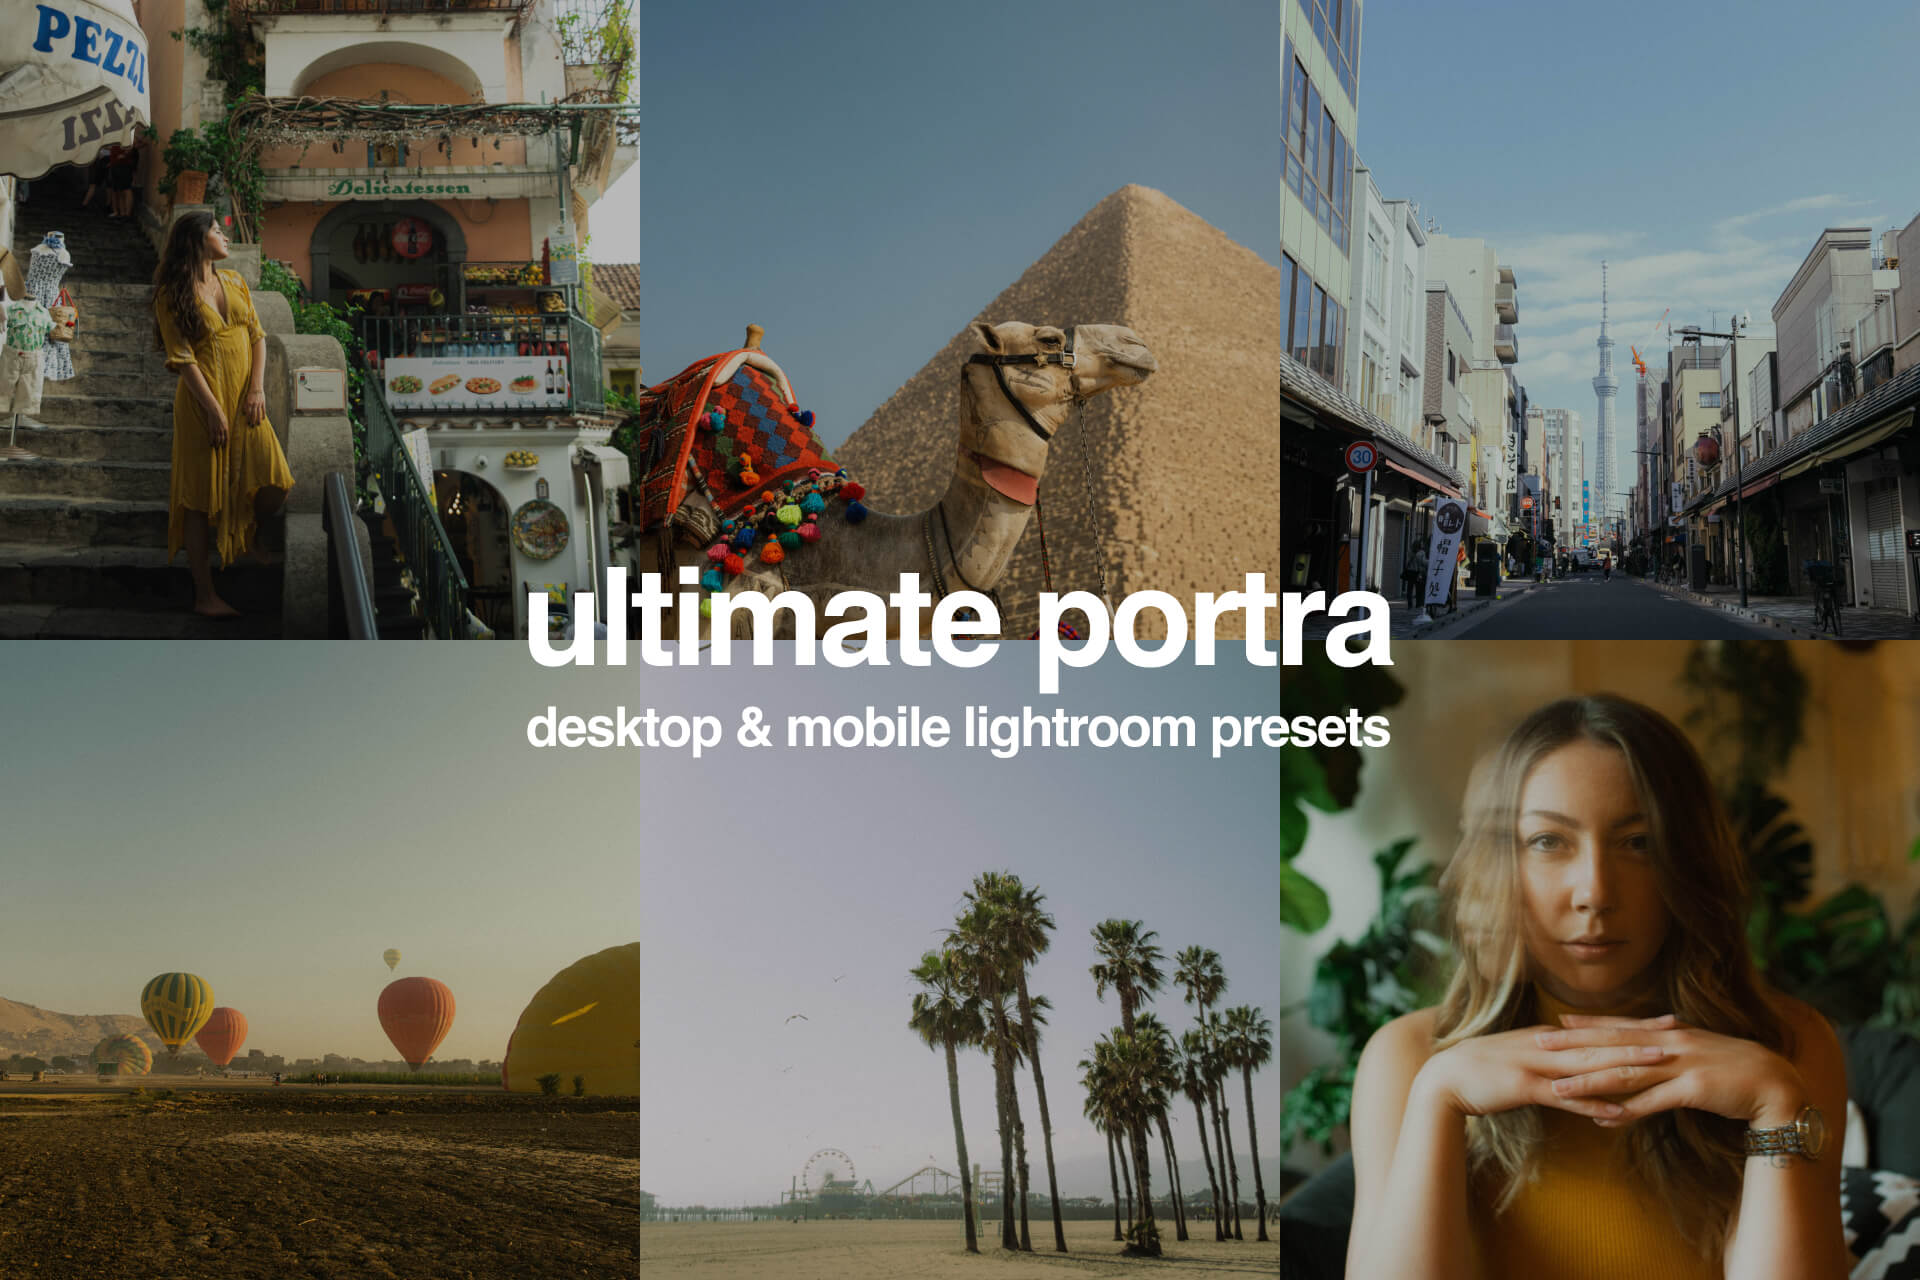 Portra preset pack for indie photos